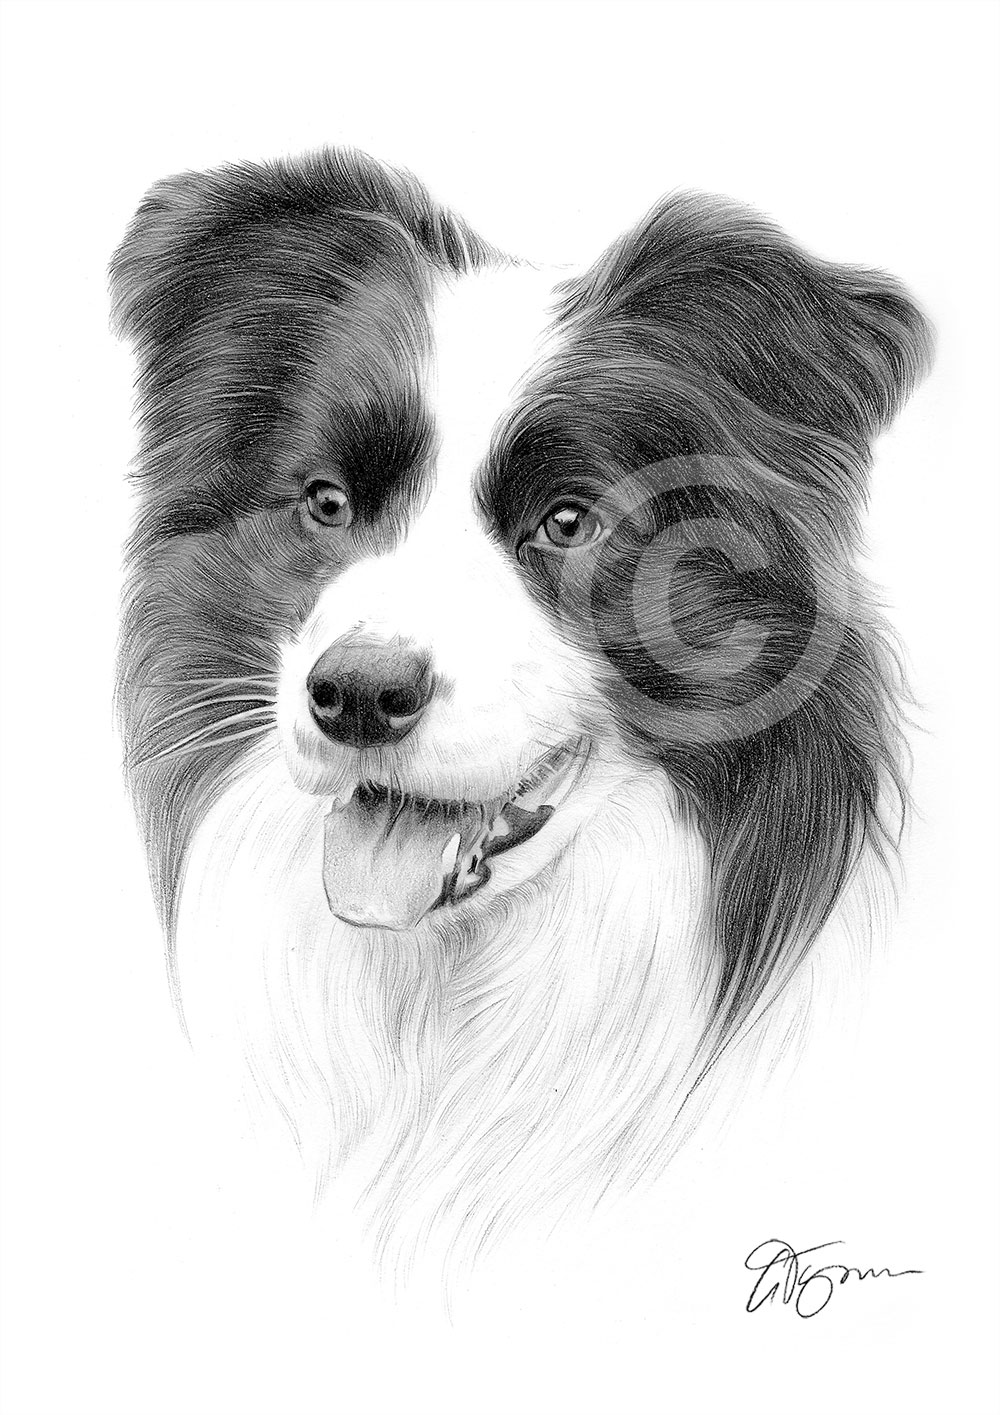 BORDER COLLIE pencil drawing art print A3 / A4 sizes